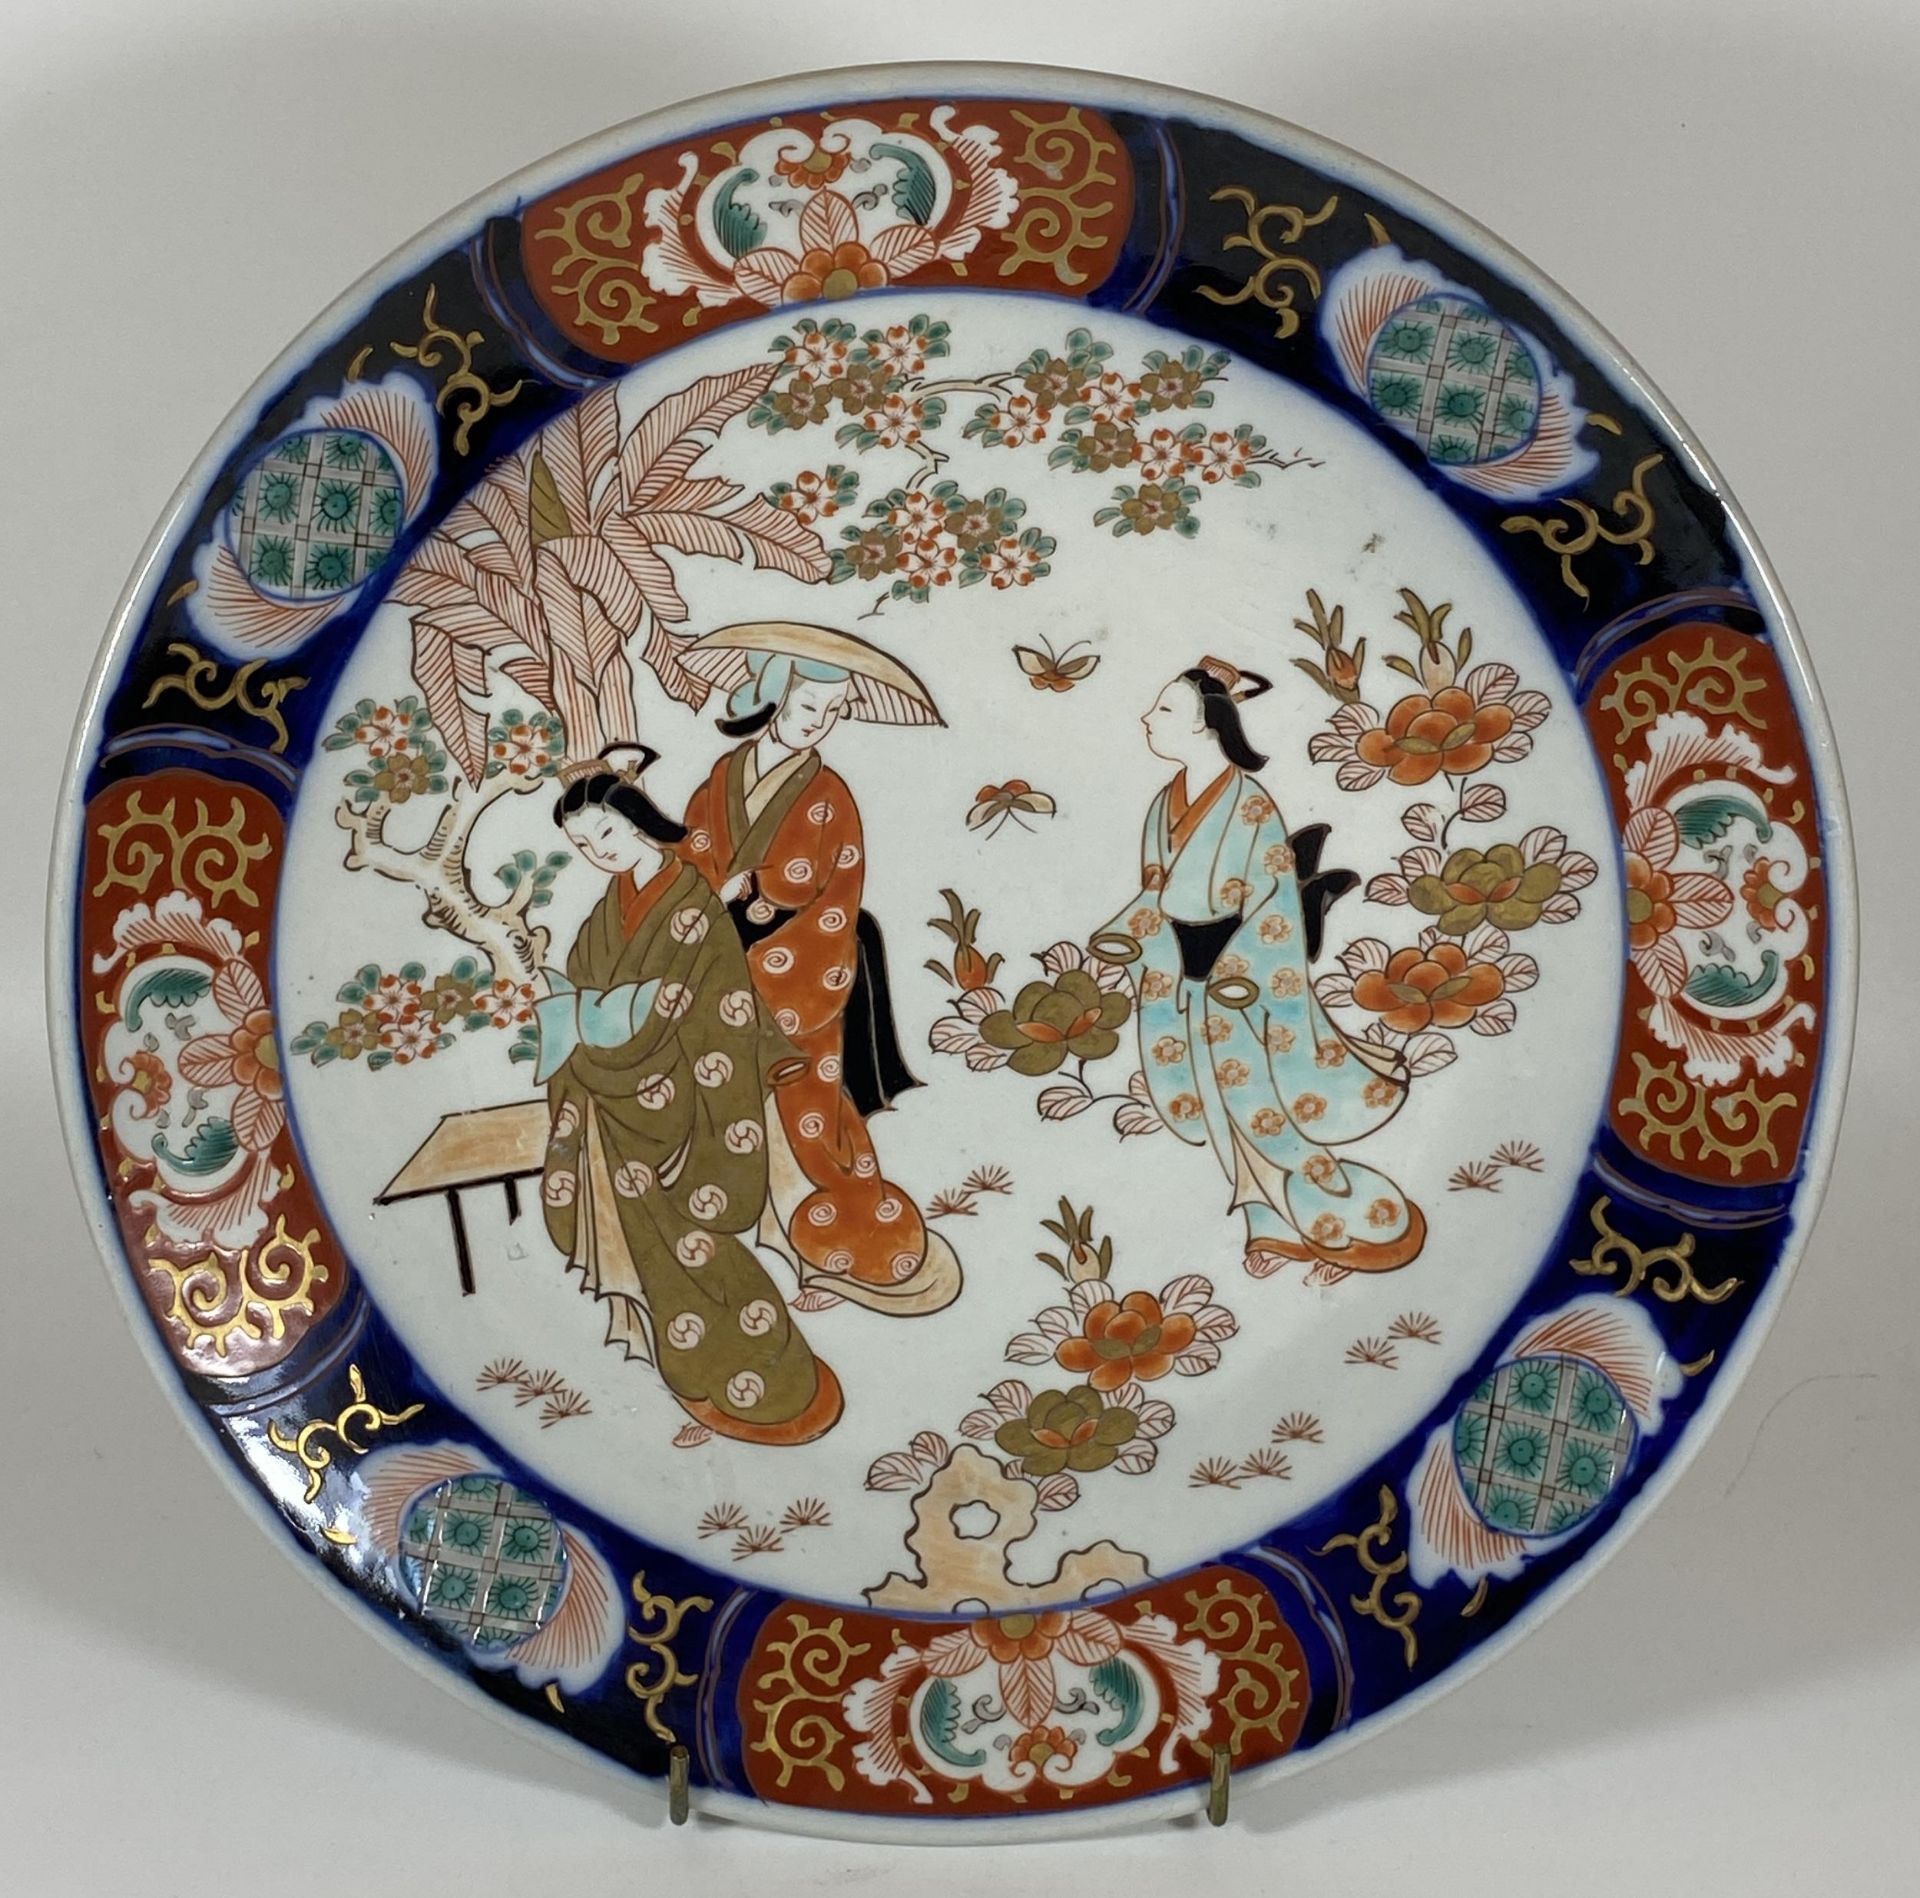 A LARGE JAPANESE MEIJI PERIOD (1868-1912) IMARI CHARGER WITH FIGURAL DESIGN, DIAMETER 31.5CM